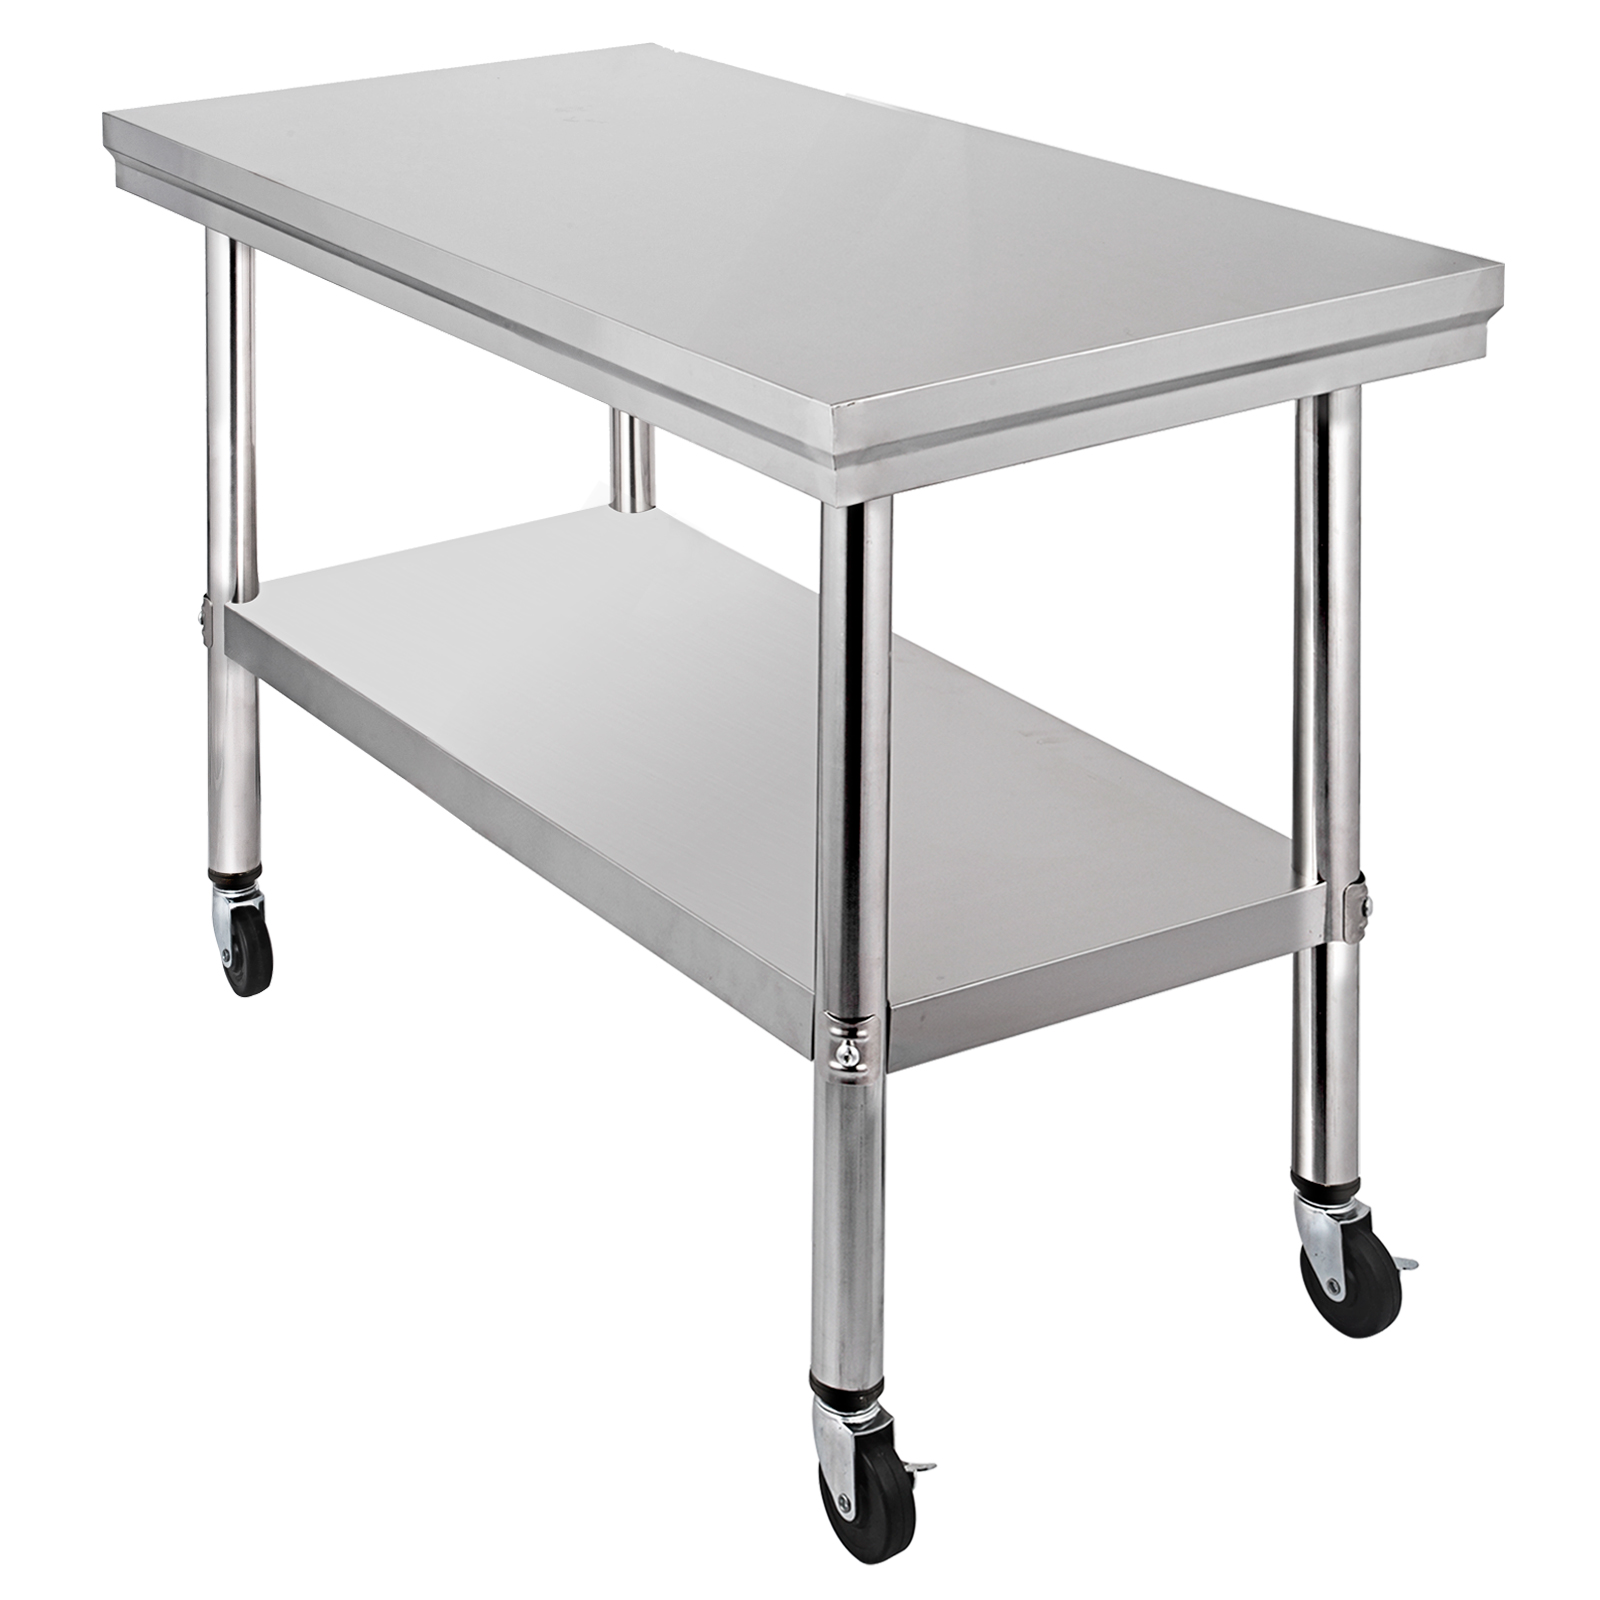 30" x 24" Stainless Steel Work Prep Table with Wheels Kitchen Stainless Steel Prep Table With Wheels